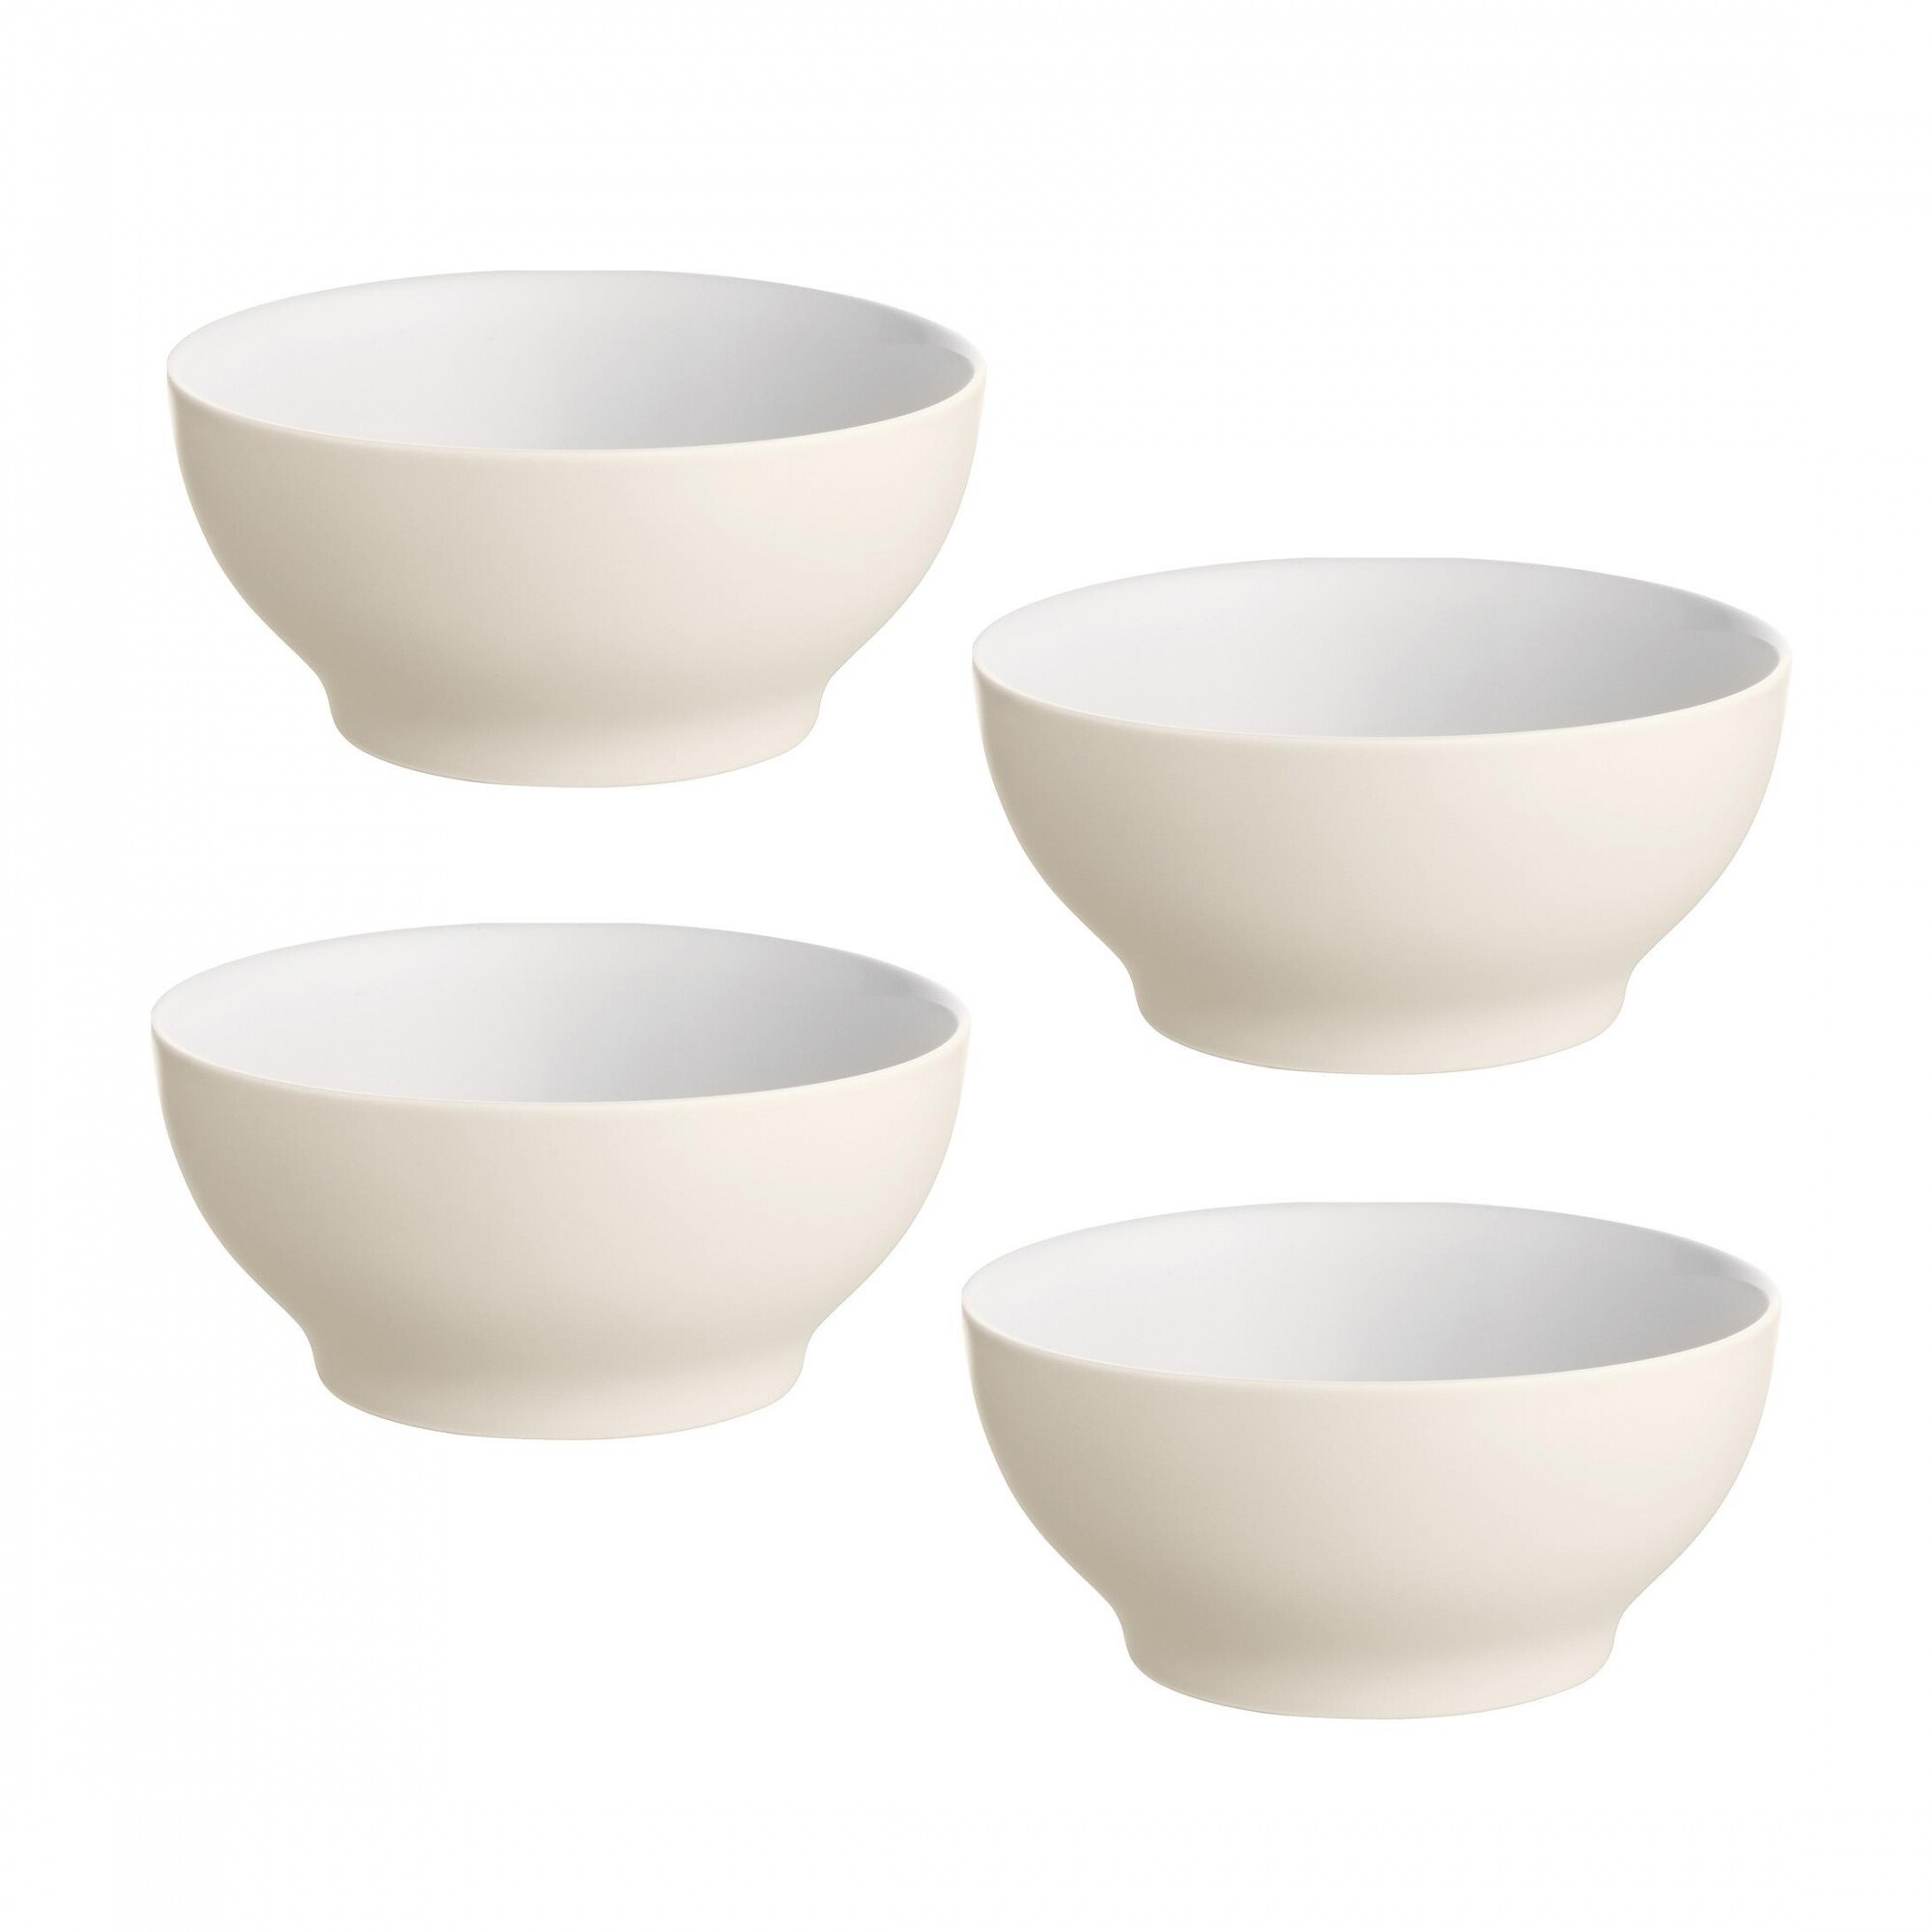 Small Bowl Tonale by David Chipperfield 20.29 oz Color: Light Grey Alessi DC03/54 LG Set of 4 